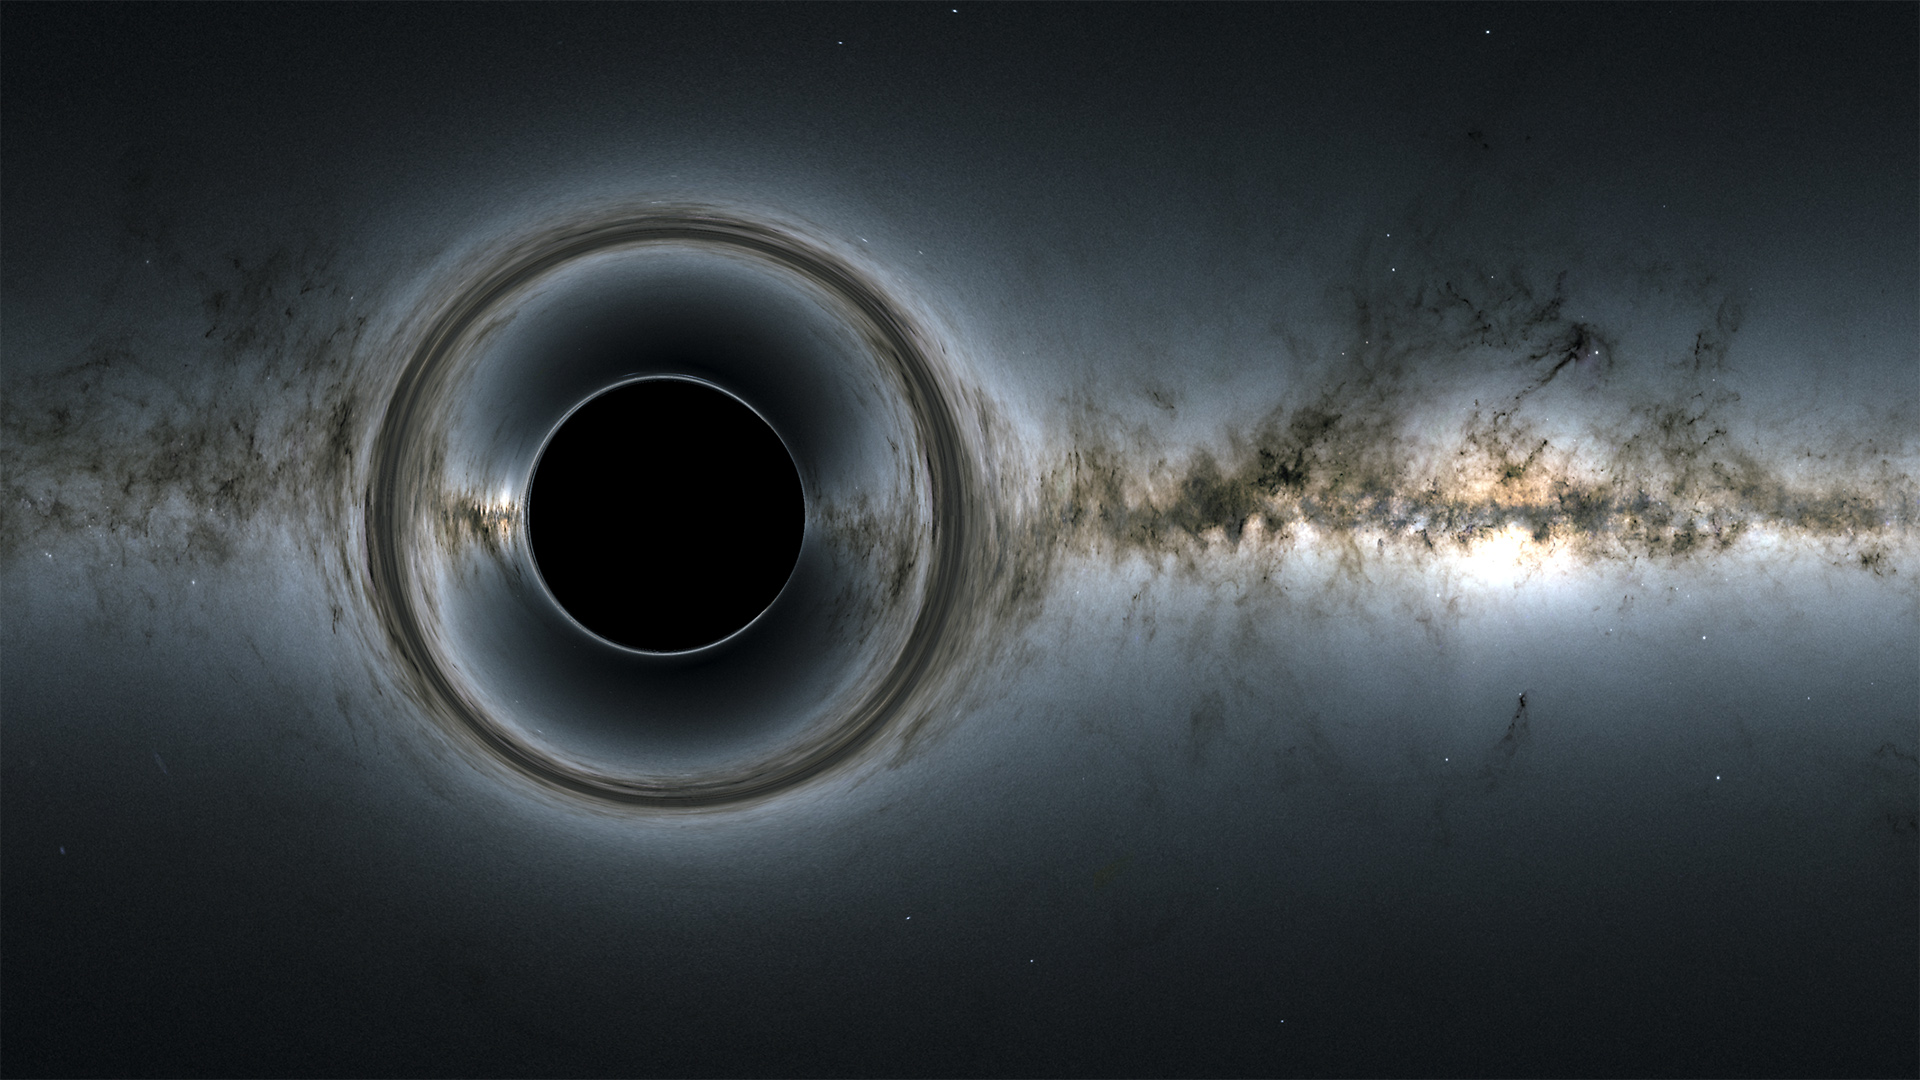 illustration of a black hole warping space-time around it, with a bright galaxy in the background